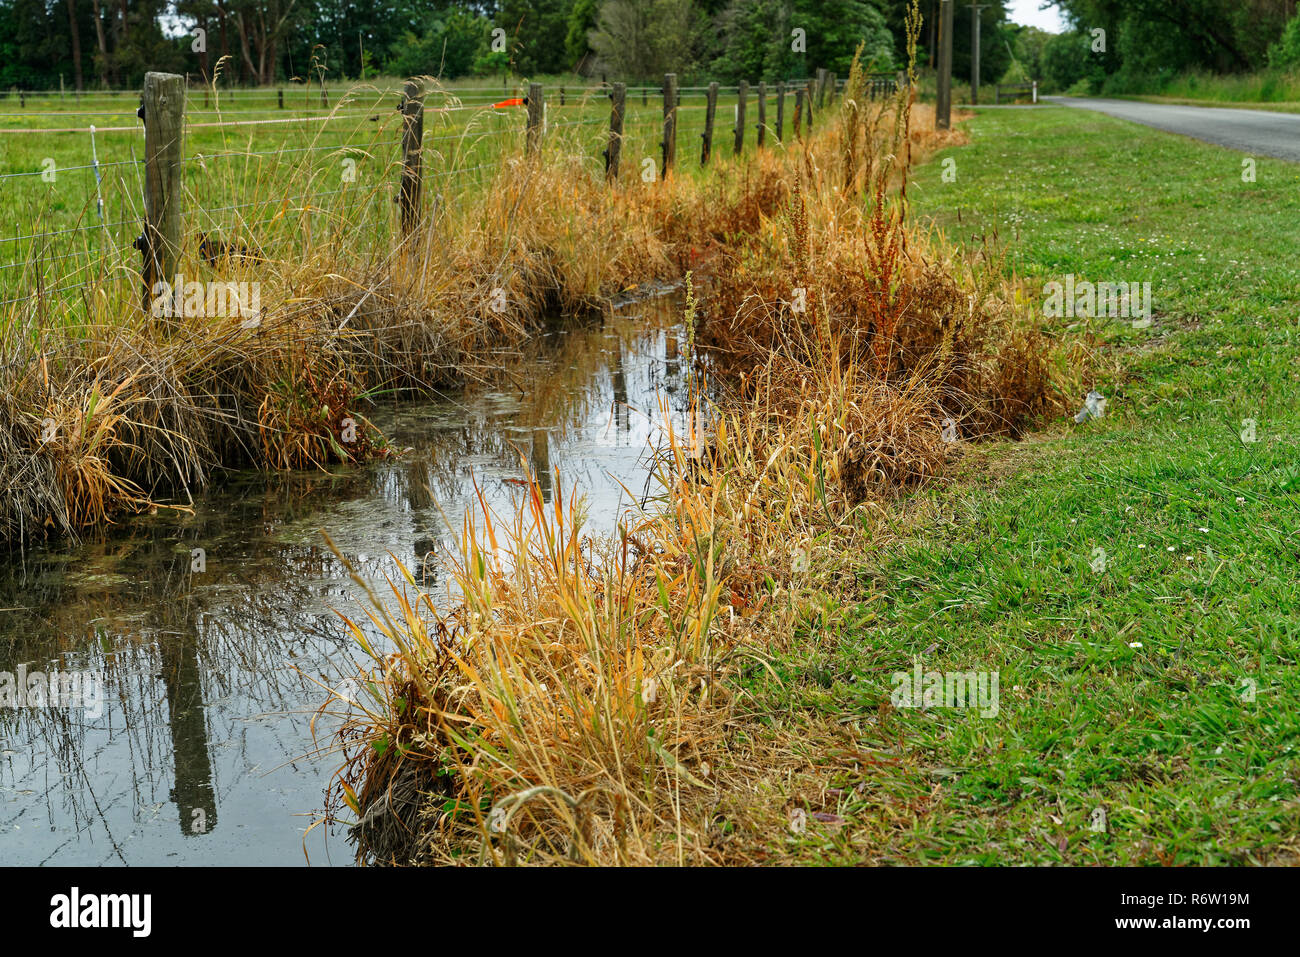 Herbicide use on a drainage ditch that drains into an estuary where shellfish are harvested for food, New Zealand. Stock Photo